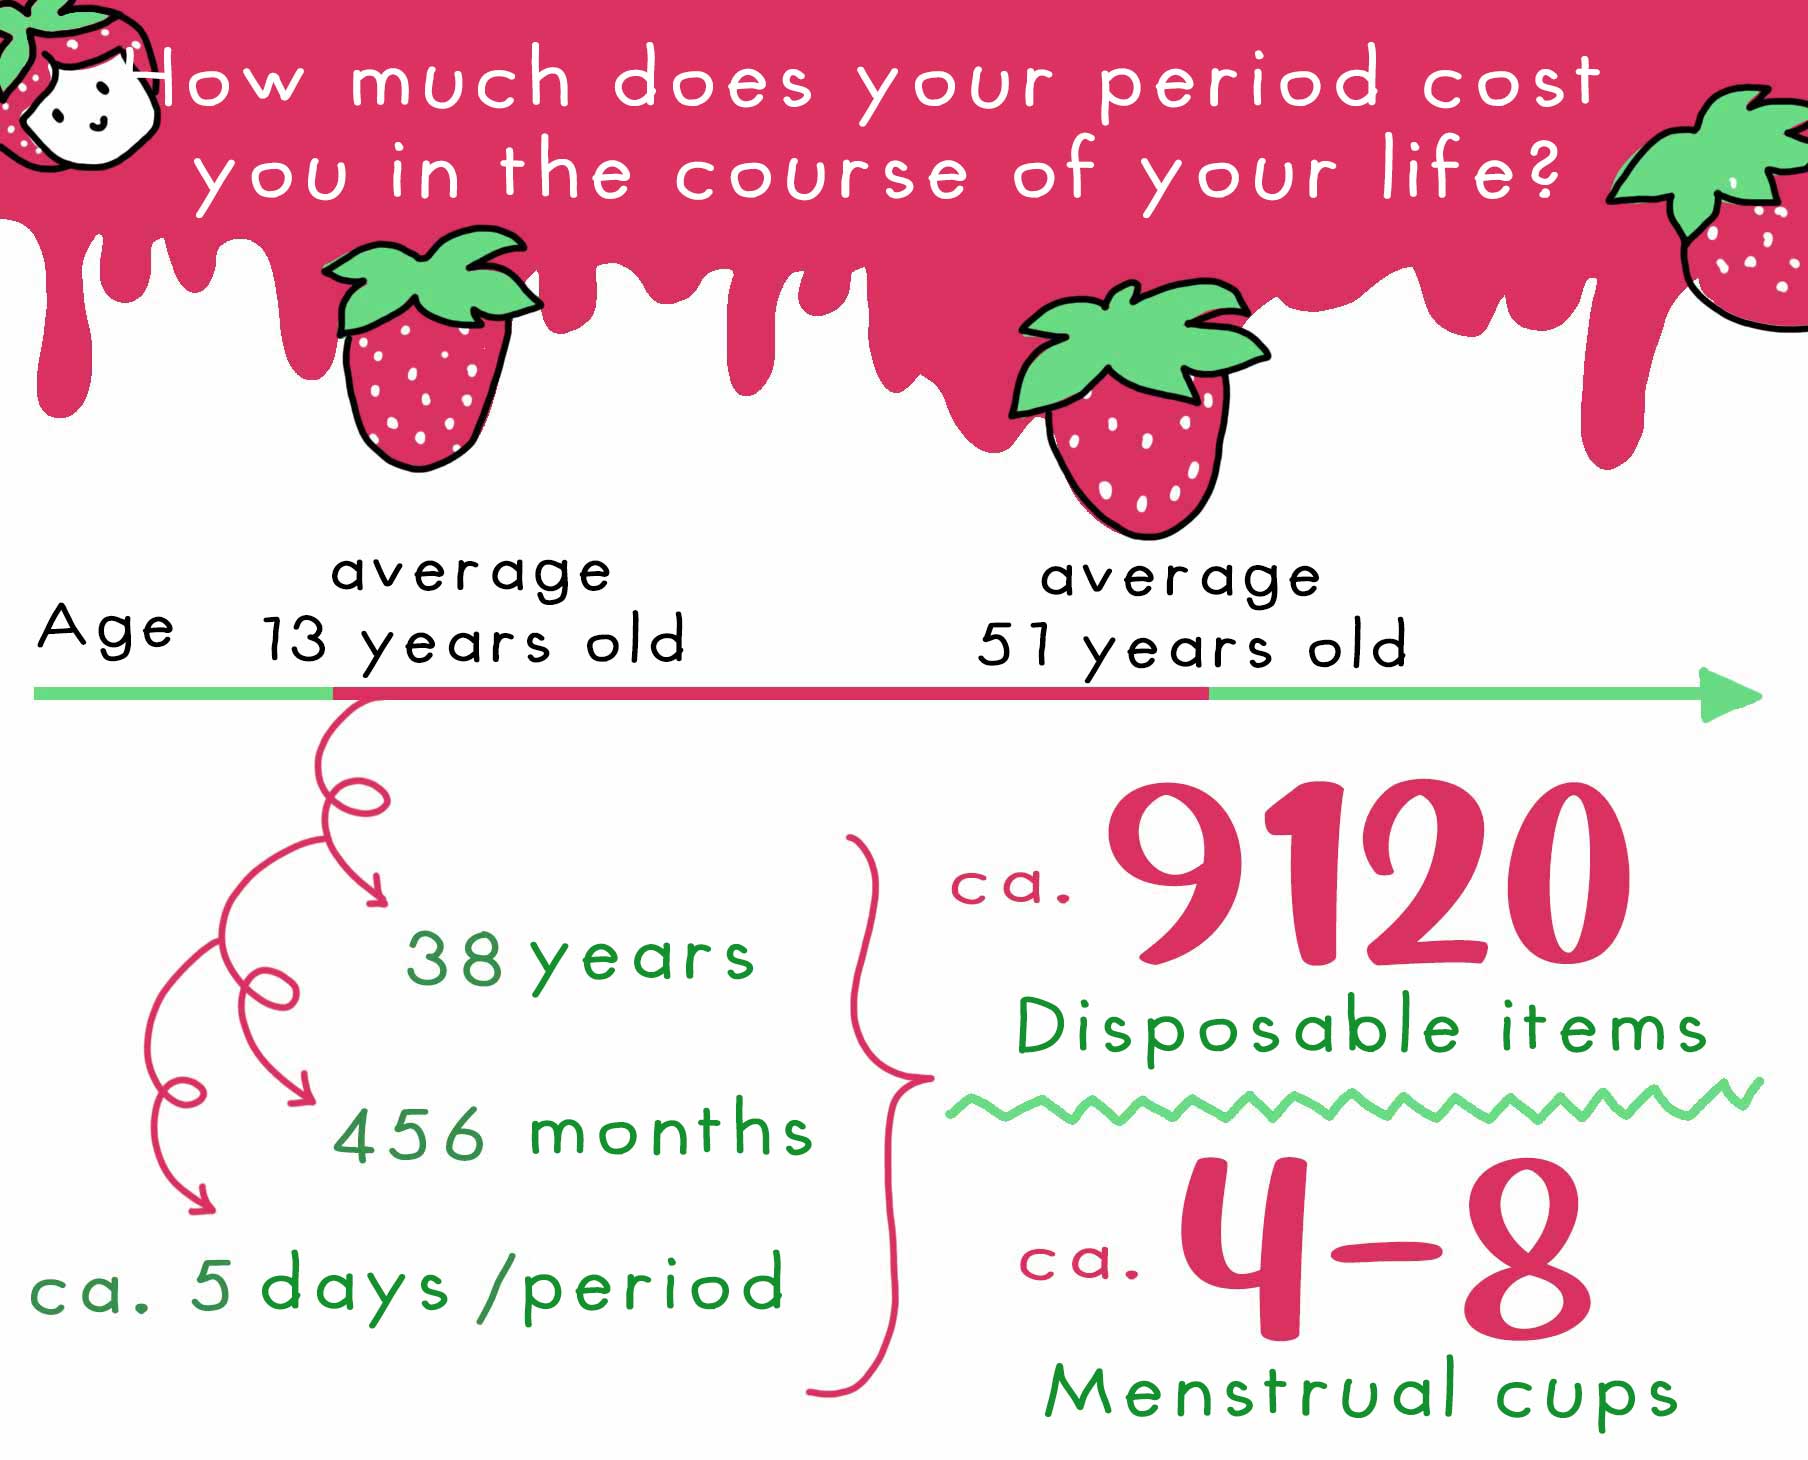 How much does your period cost you in the course of your life? From average 13 years old to average 51 years old = 38 years / 456 months with ca. 5 days per period = ca. 9120 disposable items / ca. 4-8 menstrual cups